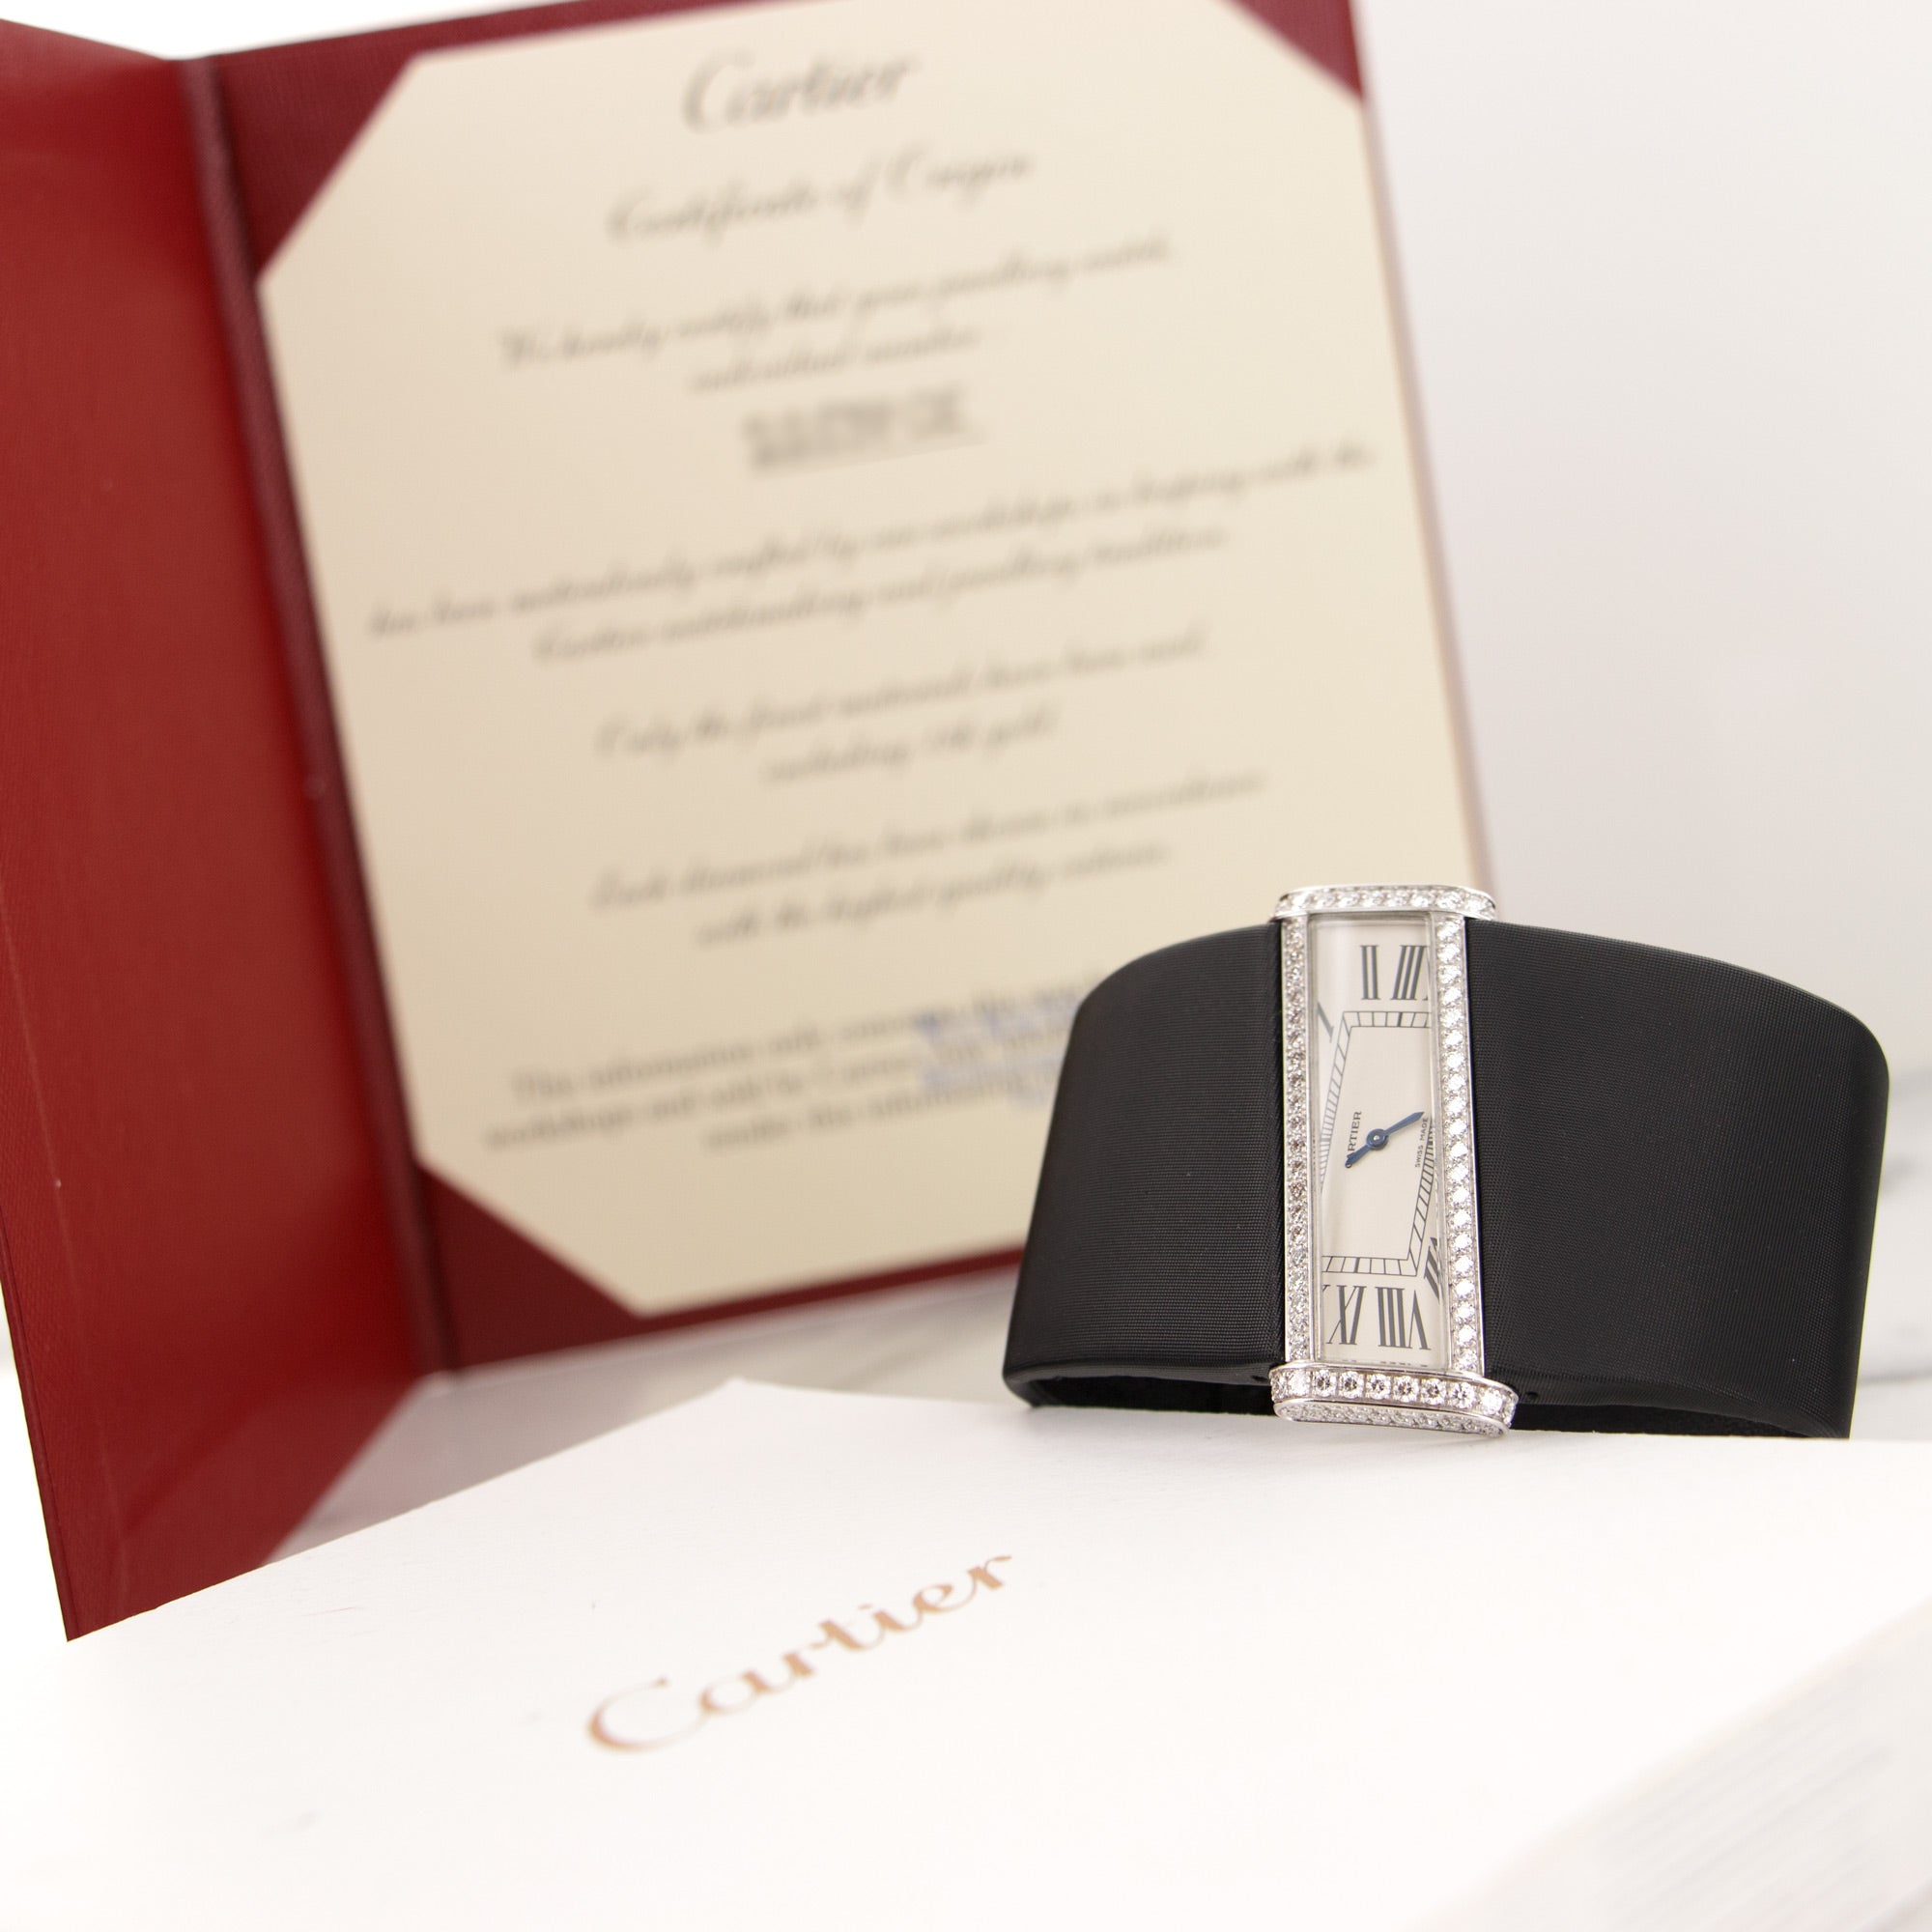 Cartier - Cartier White Gold Asymmetrical Diamond Watch with Original Box and Paper - The Keystone Watches